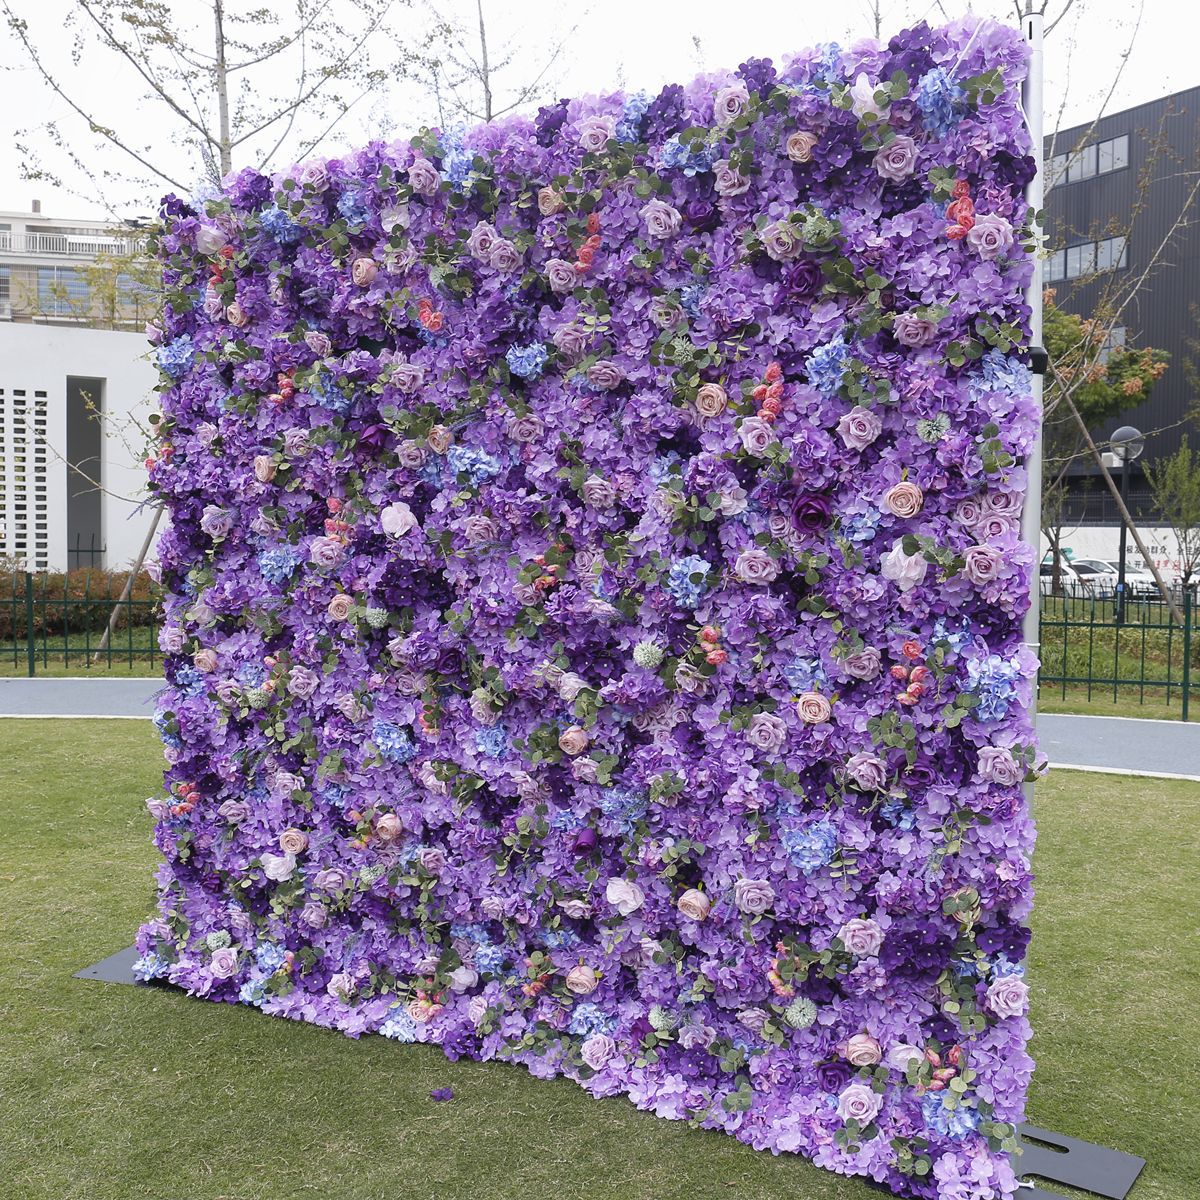 Handmade Artificial Cloth Curtain Purple Silk Flower Wall Wedding Backdrop Decoration Outdoor Event Party Decor Props